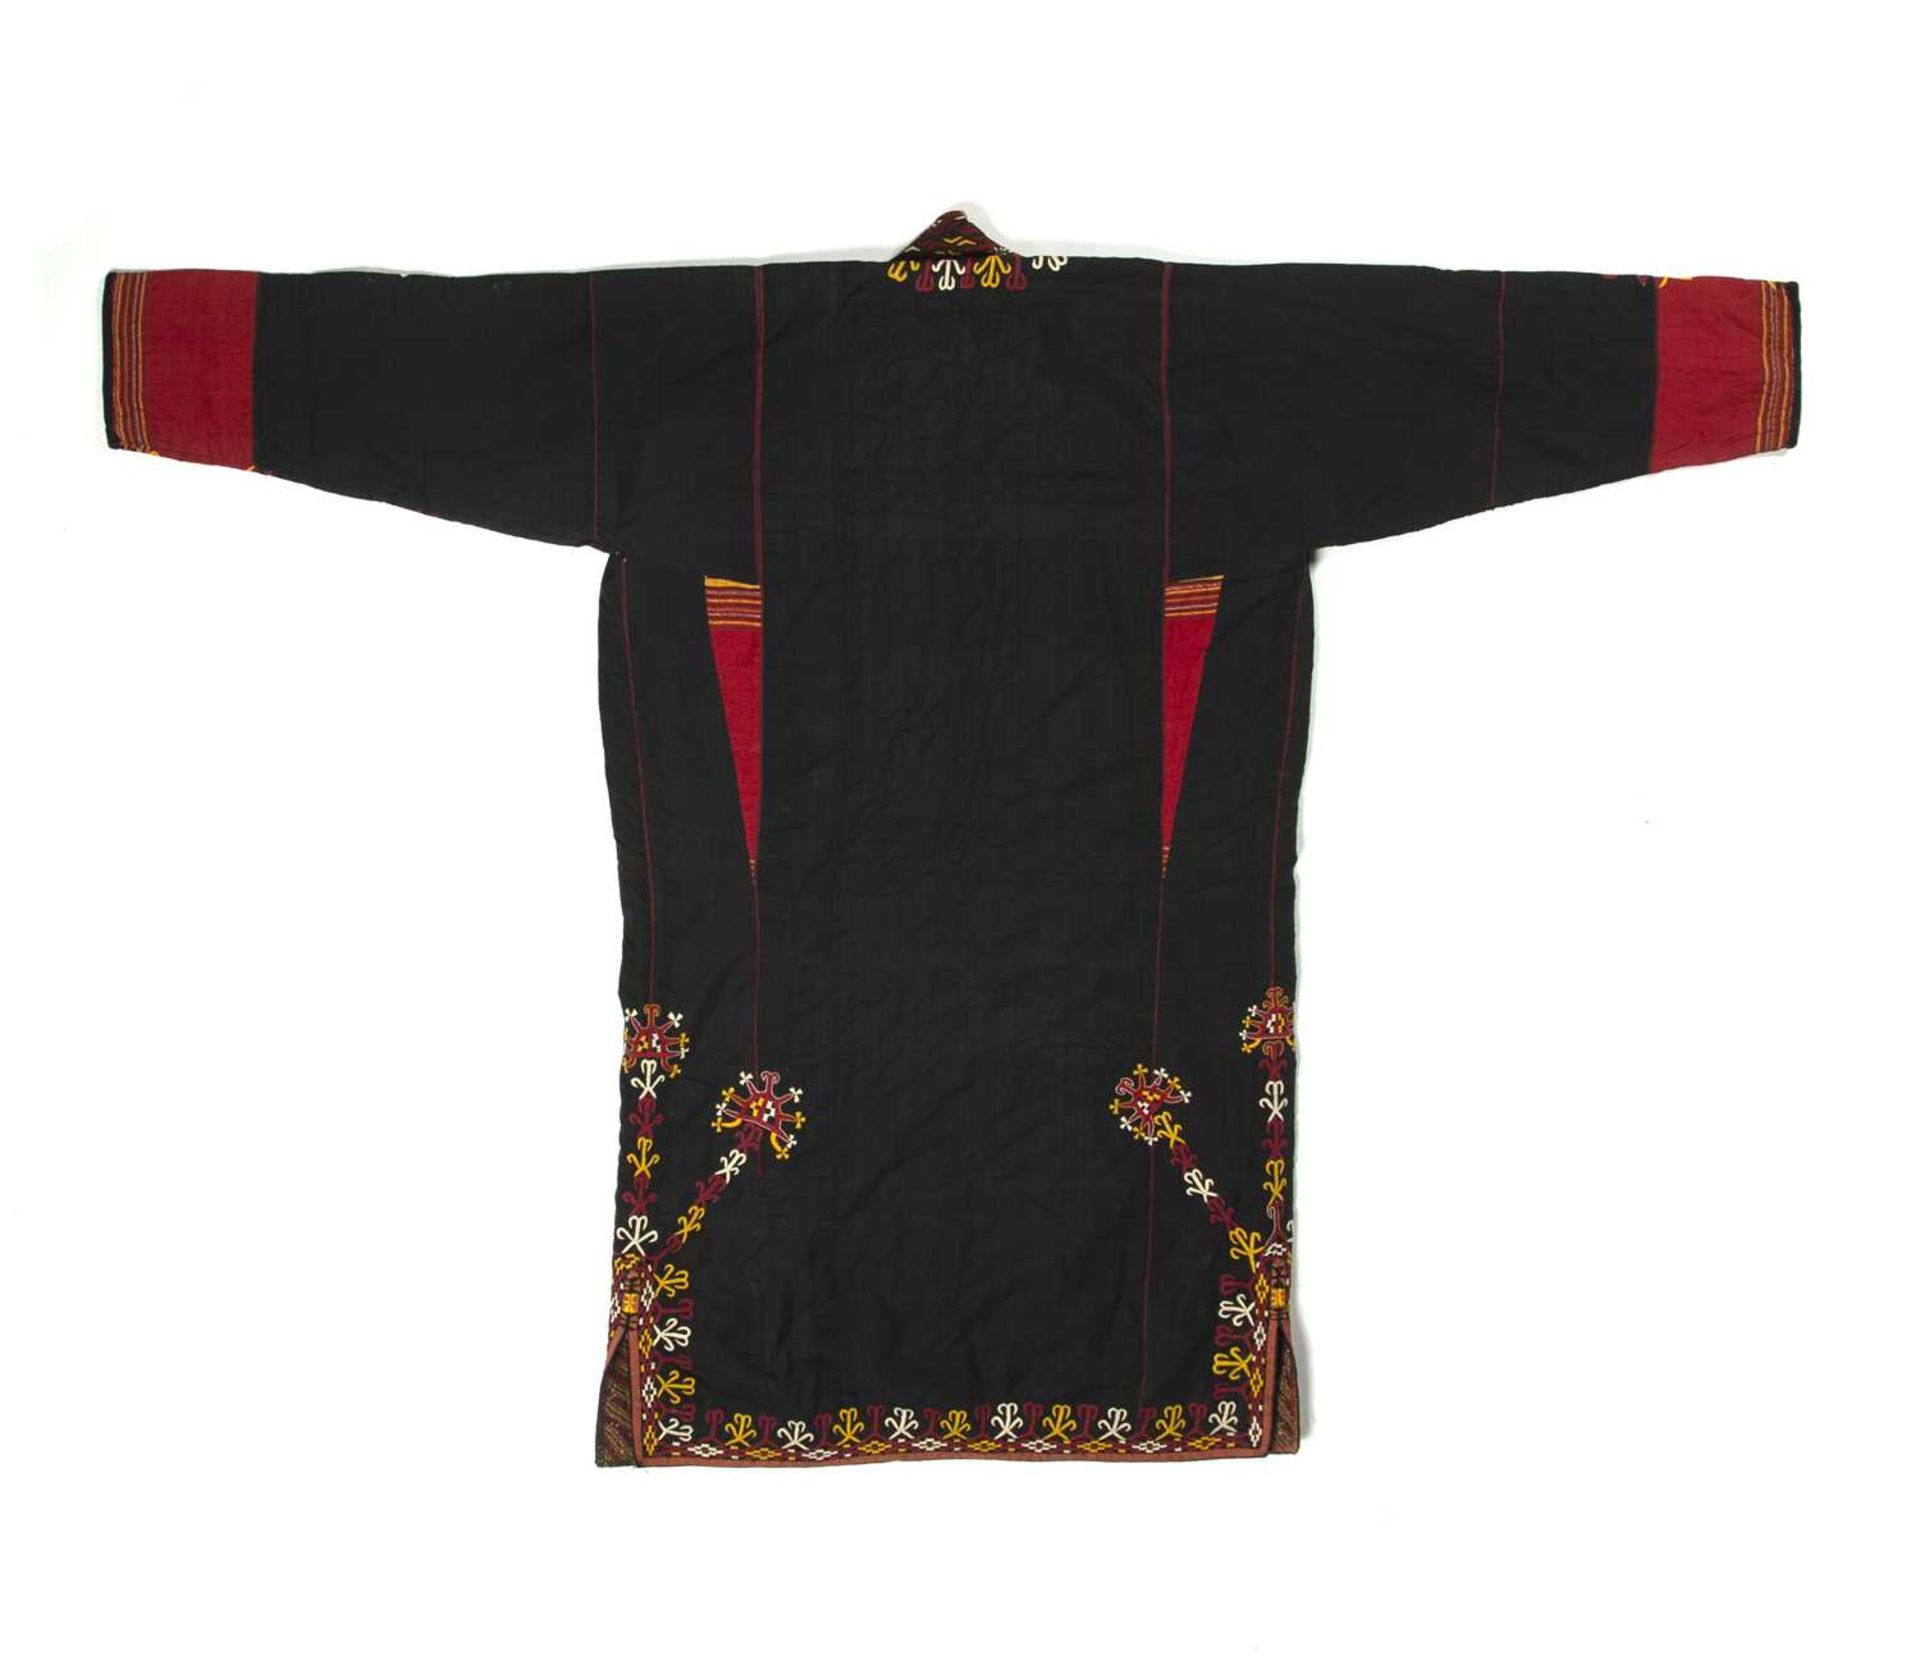 Tekke Turkoman chyrpy Turkmenistan of black ground with embroidered border and panels in red, yellow - Image 3 of 3